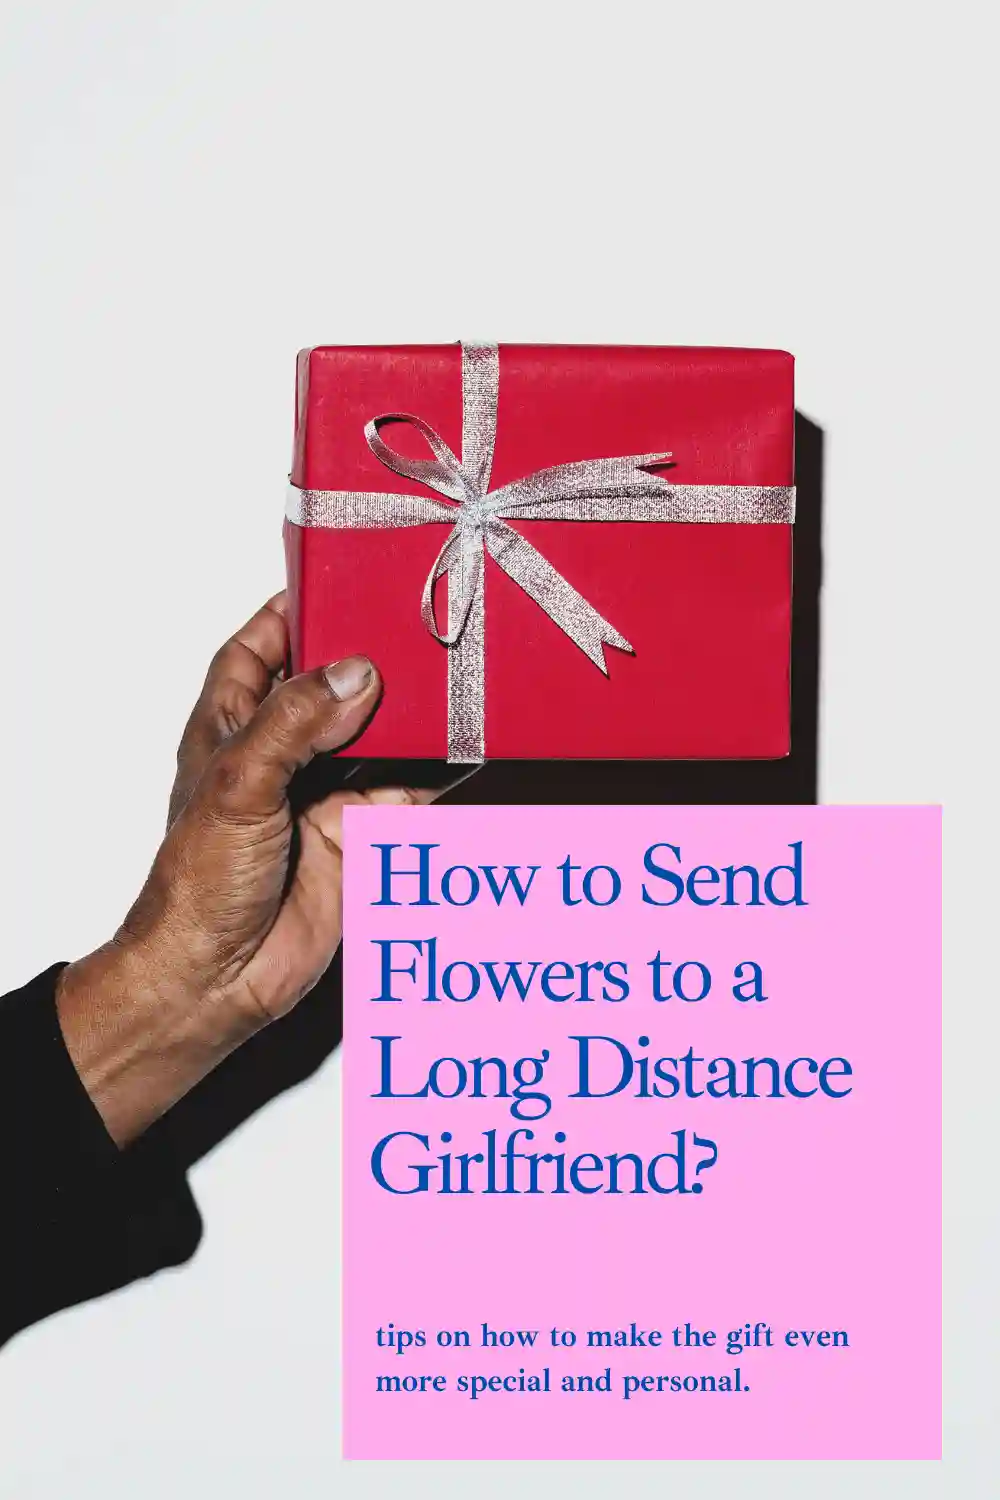 How to Send Flowers to a Long Distance Girlfriend